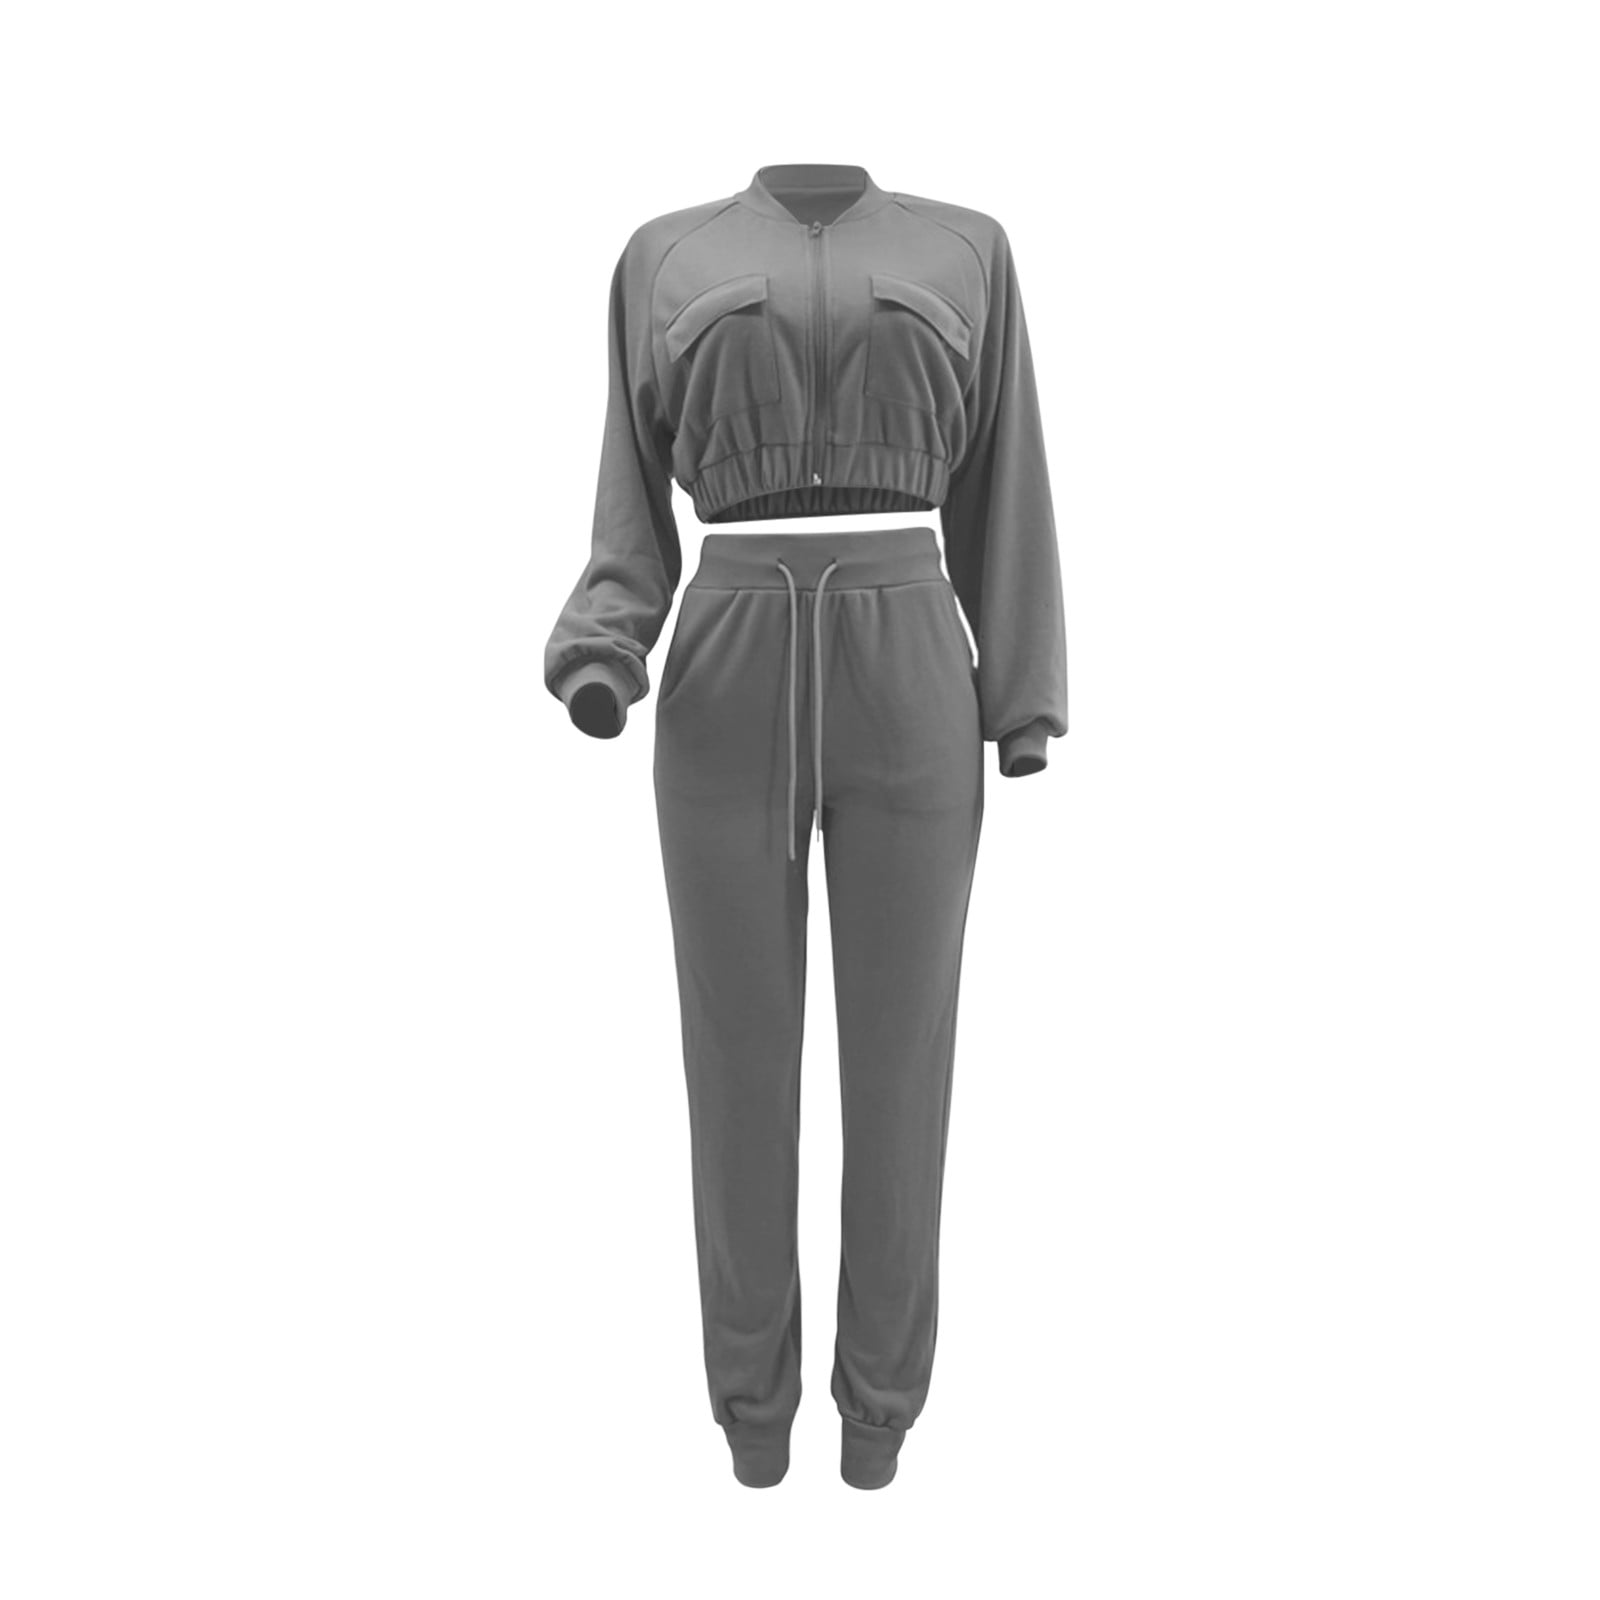 REORIAFEE Outfits for Women 2 Piece Set Womens 2 Piece Lounge